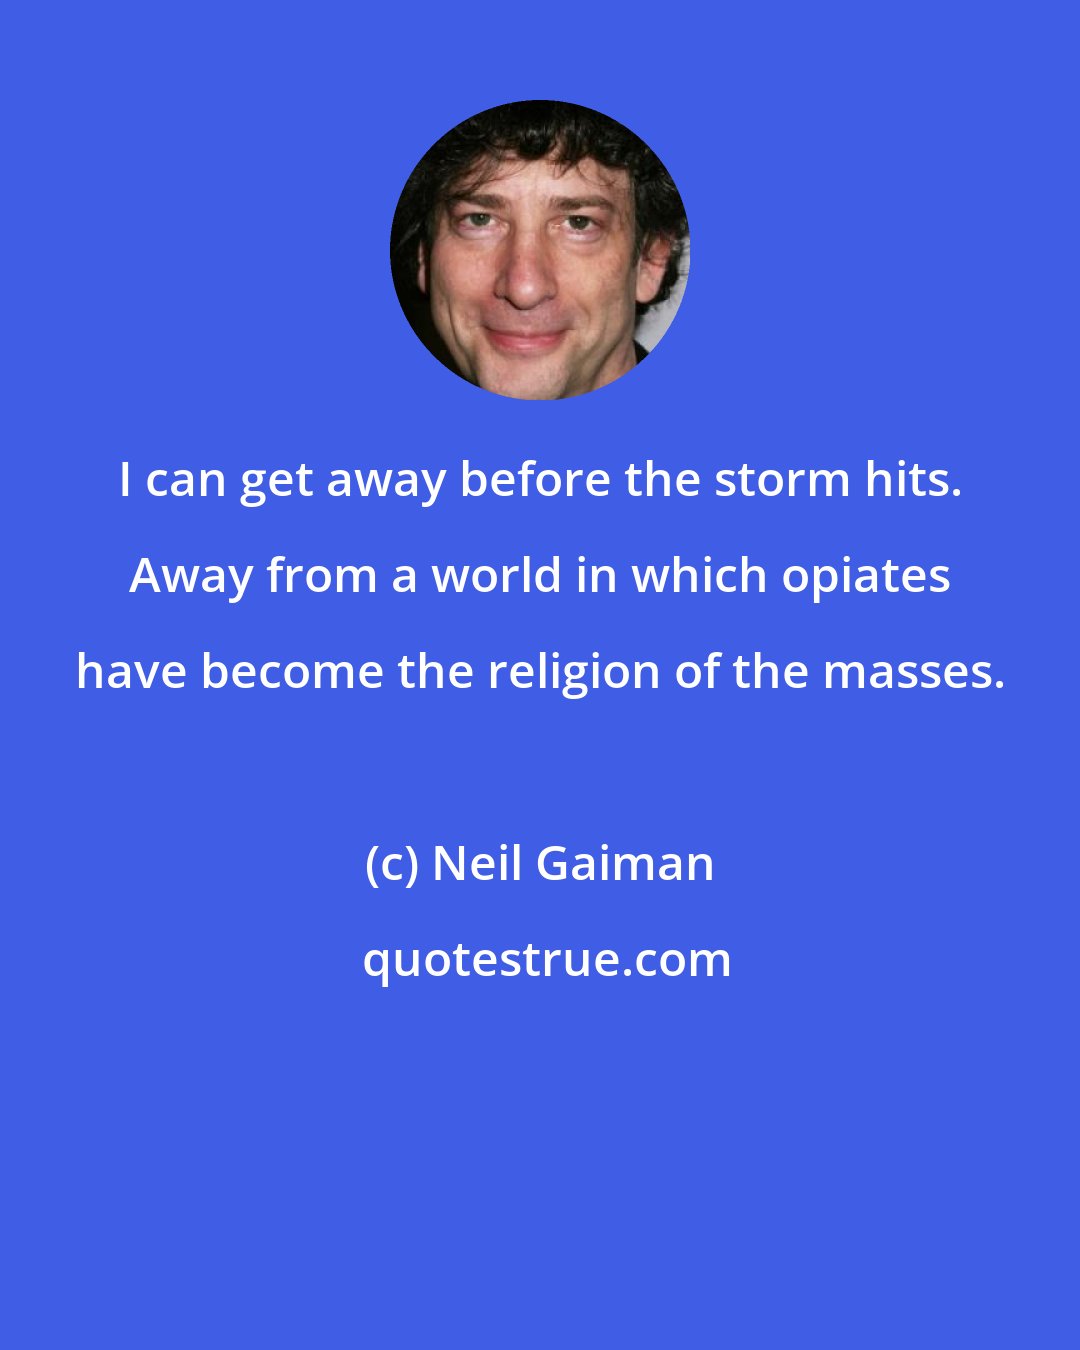 Neil Gaiman: I can get away before the storm hits. Away from a world in which opiates have become the religion of the masses.